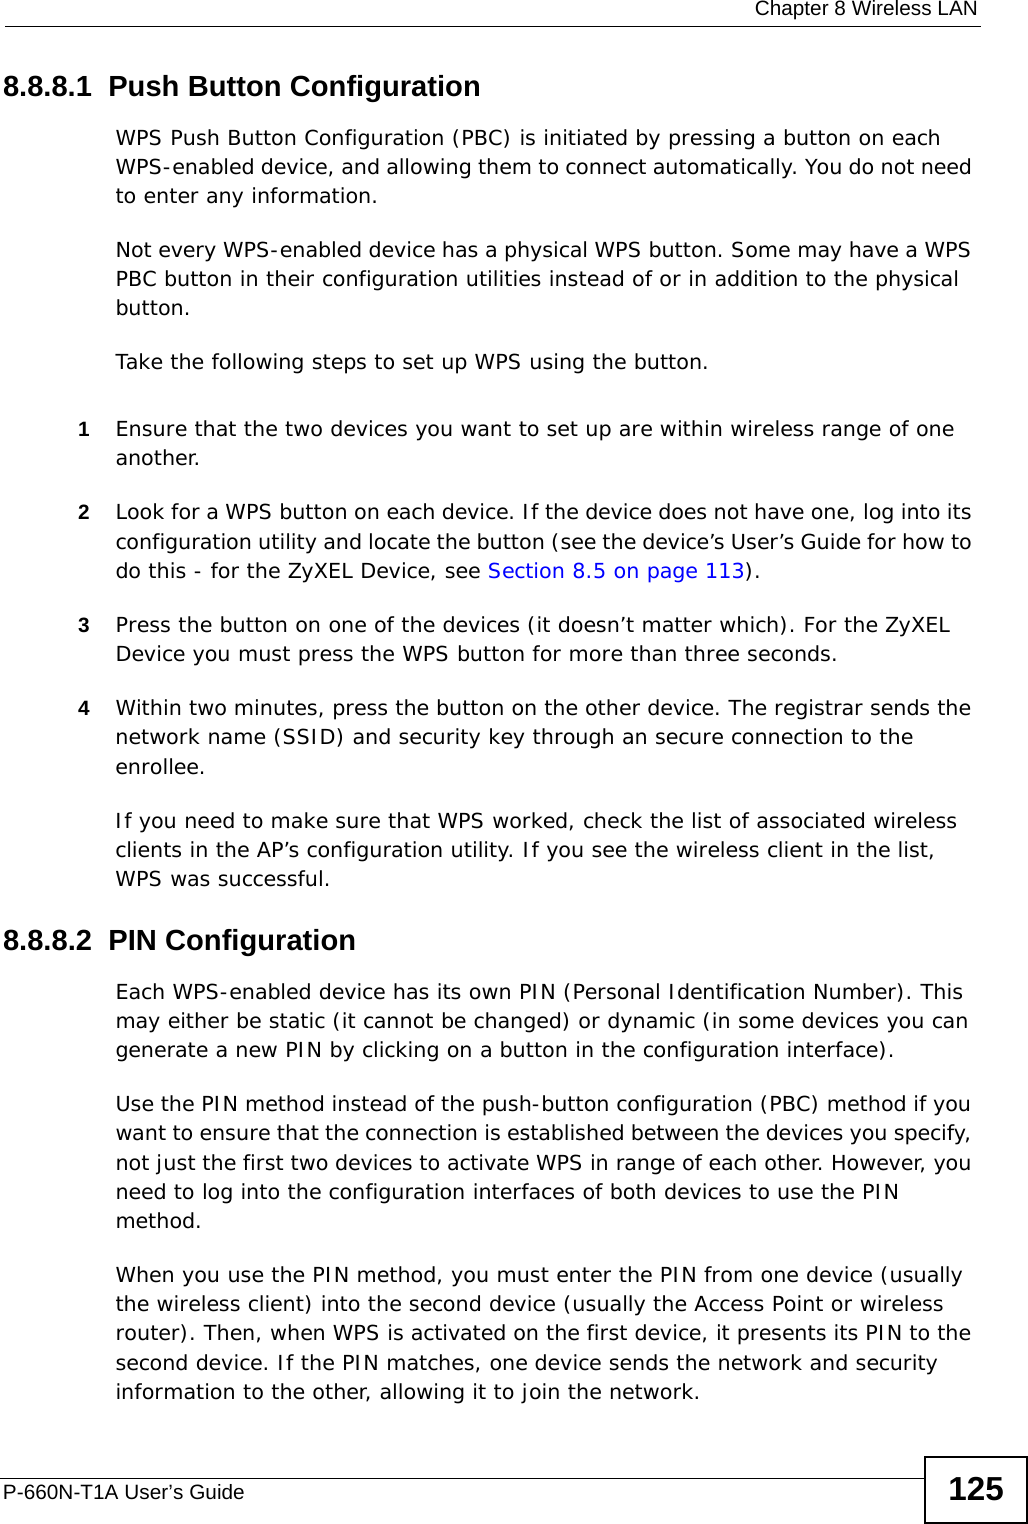  Chapter 8 Wireless LANP-660N-T1A User’s Guide 1258.8.8.1  Push Button ConfigurationWPS Push Button Configuration (PBC) is initiated by pressing a button on each WPS-enabled device, and allowing them to connect automatically. You do not need to enter any information. Not every WPS-enabled device has a physical WPS button. Some may have a WPS PBC button in their configuration utilities instead of or in addition to the physical button.Take the following steps to set up WPS using the button.1Ensure that the two devices you want to set up are within wireless range of one another. 2Look for a WPS button on each device. If the device does not have one, log into its configuration utility and locate the button (see the device’s User’s Guide for how to do this - for the ZyXEL Device, see Section 8.5 on page 113).3Press the button on one of the devices (it doesn’t matter which). For the ZyXEL Device you must press the WPS button for more than three seconds.4Within two minutes, press the button on the other device. The registrar sends the network name (SSID) and security key through an secure connection to the enrollee.If you need to make sure that WPS worked, check the list of associated wireless clients in the AP’s configuration utility. If you see the wireless client in the list, WPS was successful.8.8.8.2  PIN ConfigurationEach WPS-enabled device has its own PIN (Personal Identification Number). This may either be static (it cannot be changed) or dynamic (in some devices you can generate a new PIN by clicking on a button in the configuration interface). Use the PIN method instead of the push-button configuration (PBC) method if you want to ensure that the connection is established between the devices you specify, not just the first two devices to activate WPS in range of each other. However, you need to log into the configuration interfaces of both devices to use the PIN method.When you use the PIN method, you must enter the PIN from one device (usually the wireless client) into the second device (usually the Access Point or wireless router). Then, when WPS is activated on the first device, it presents its PIN to the second device. If the PIN matches, one device sends the network and security information to the other, allowing it to join the network.